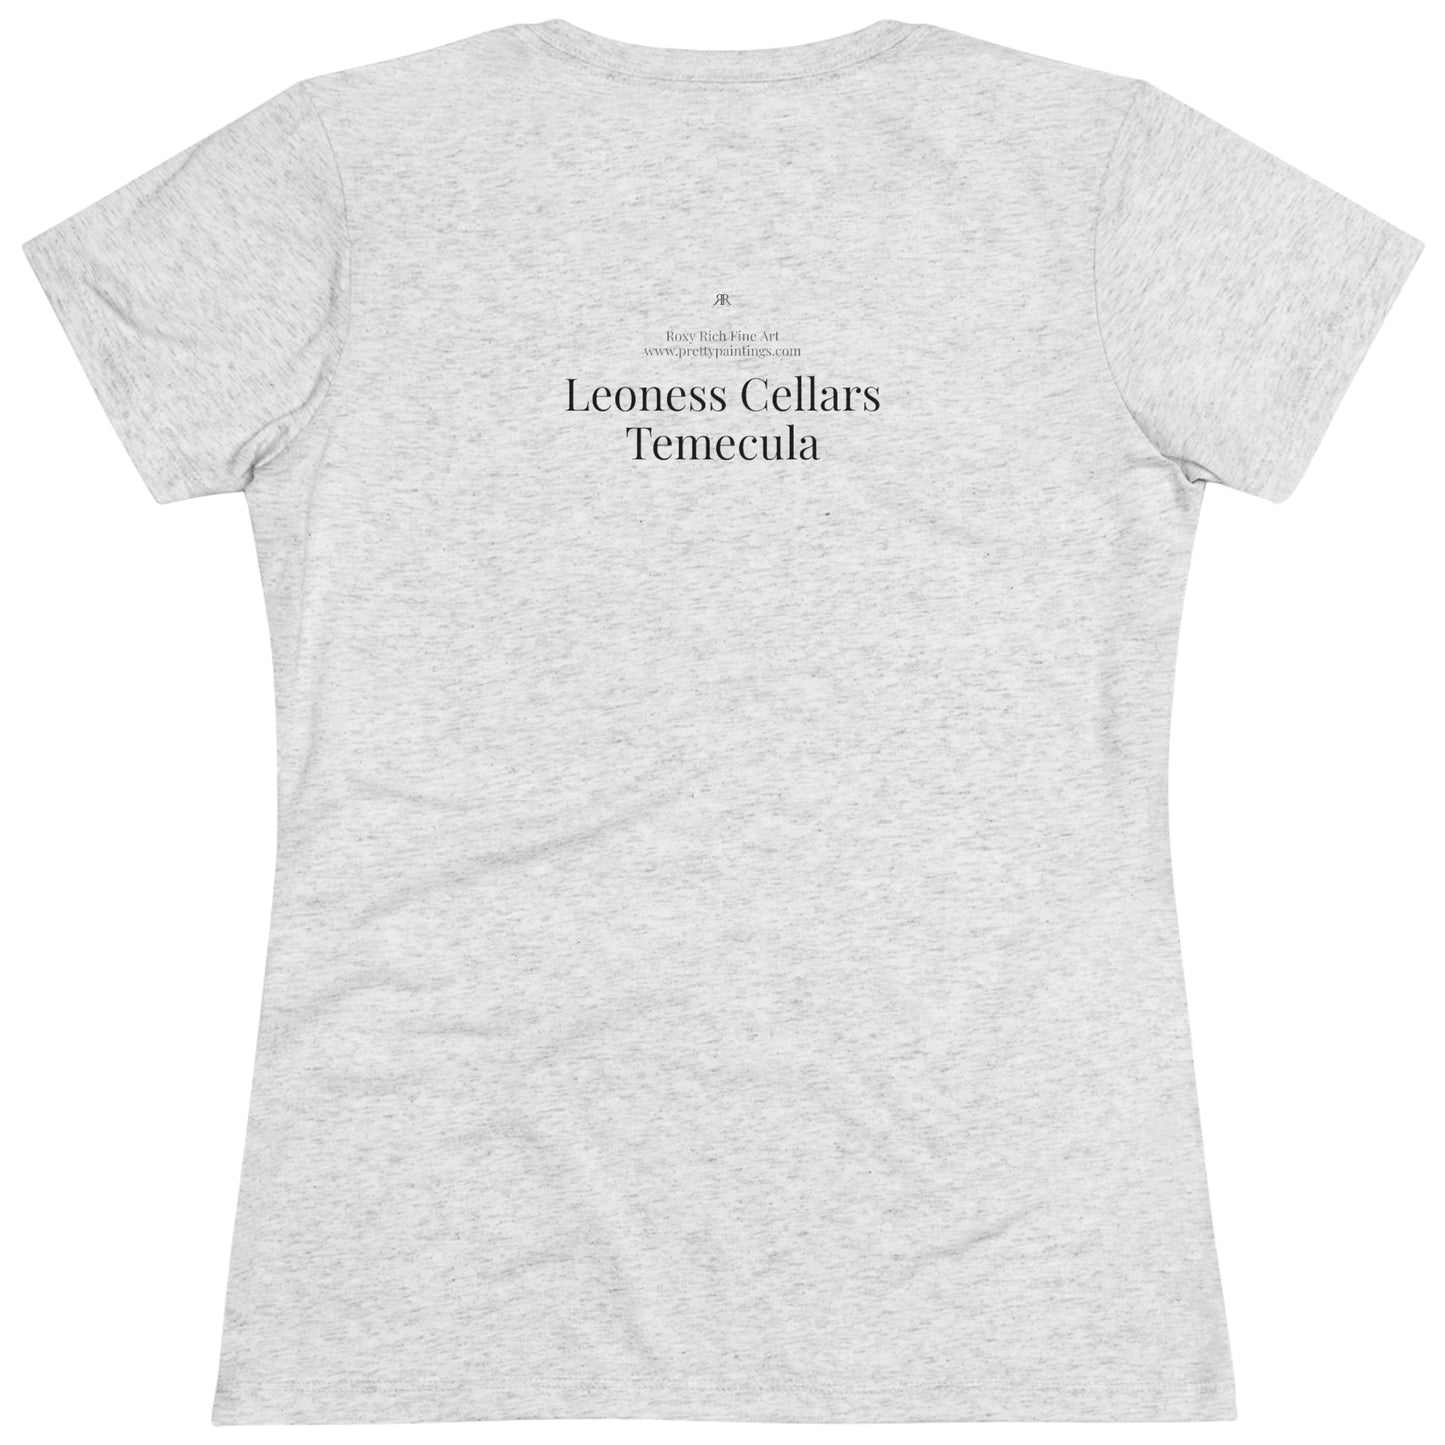 Leoness Cellars (that day it snowed) Temecula Women's fitted Triblend Tee  tee shirt